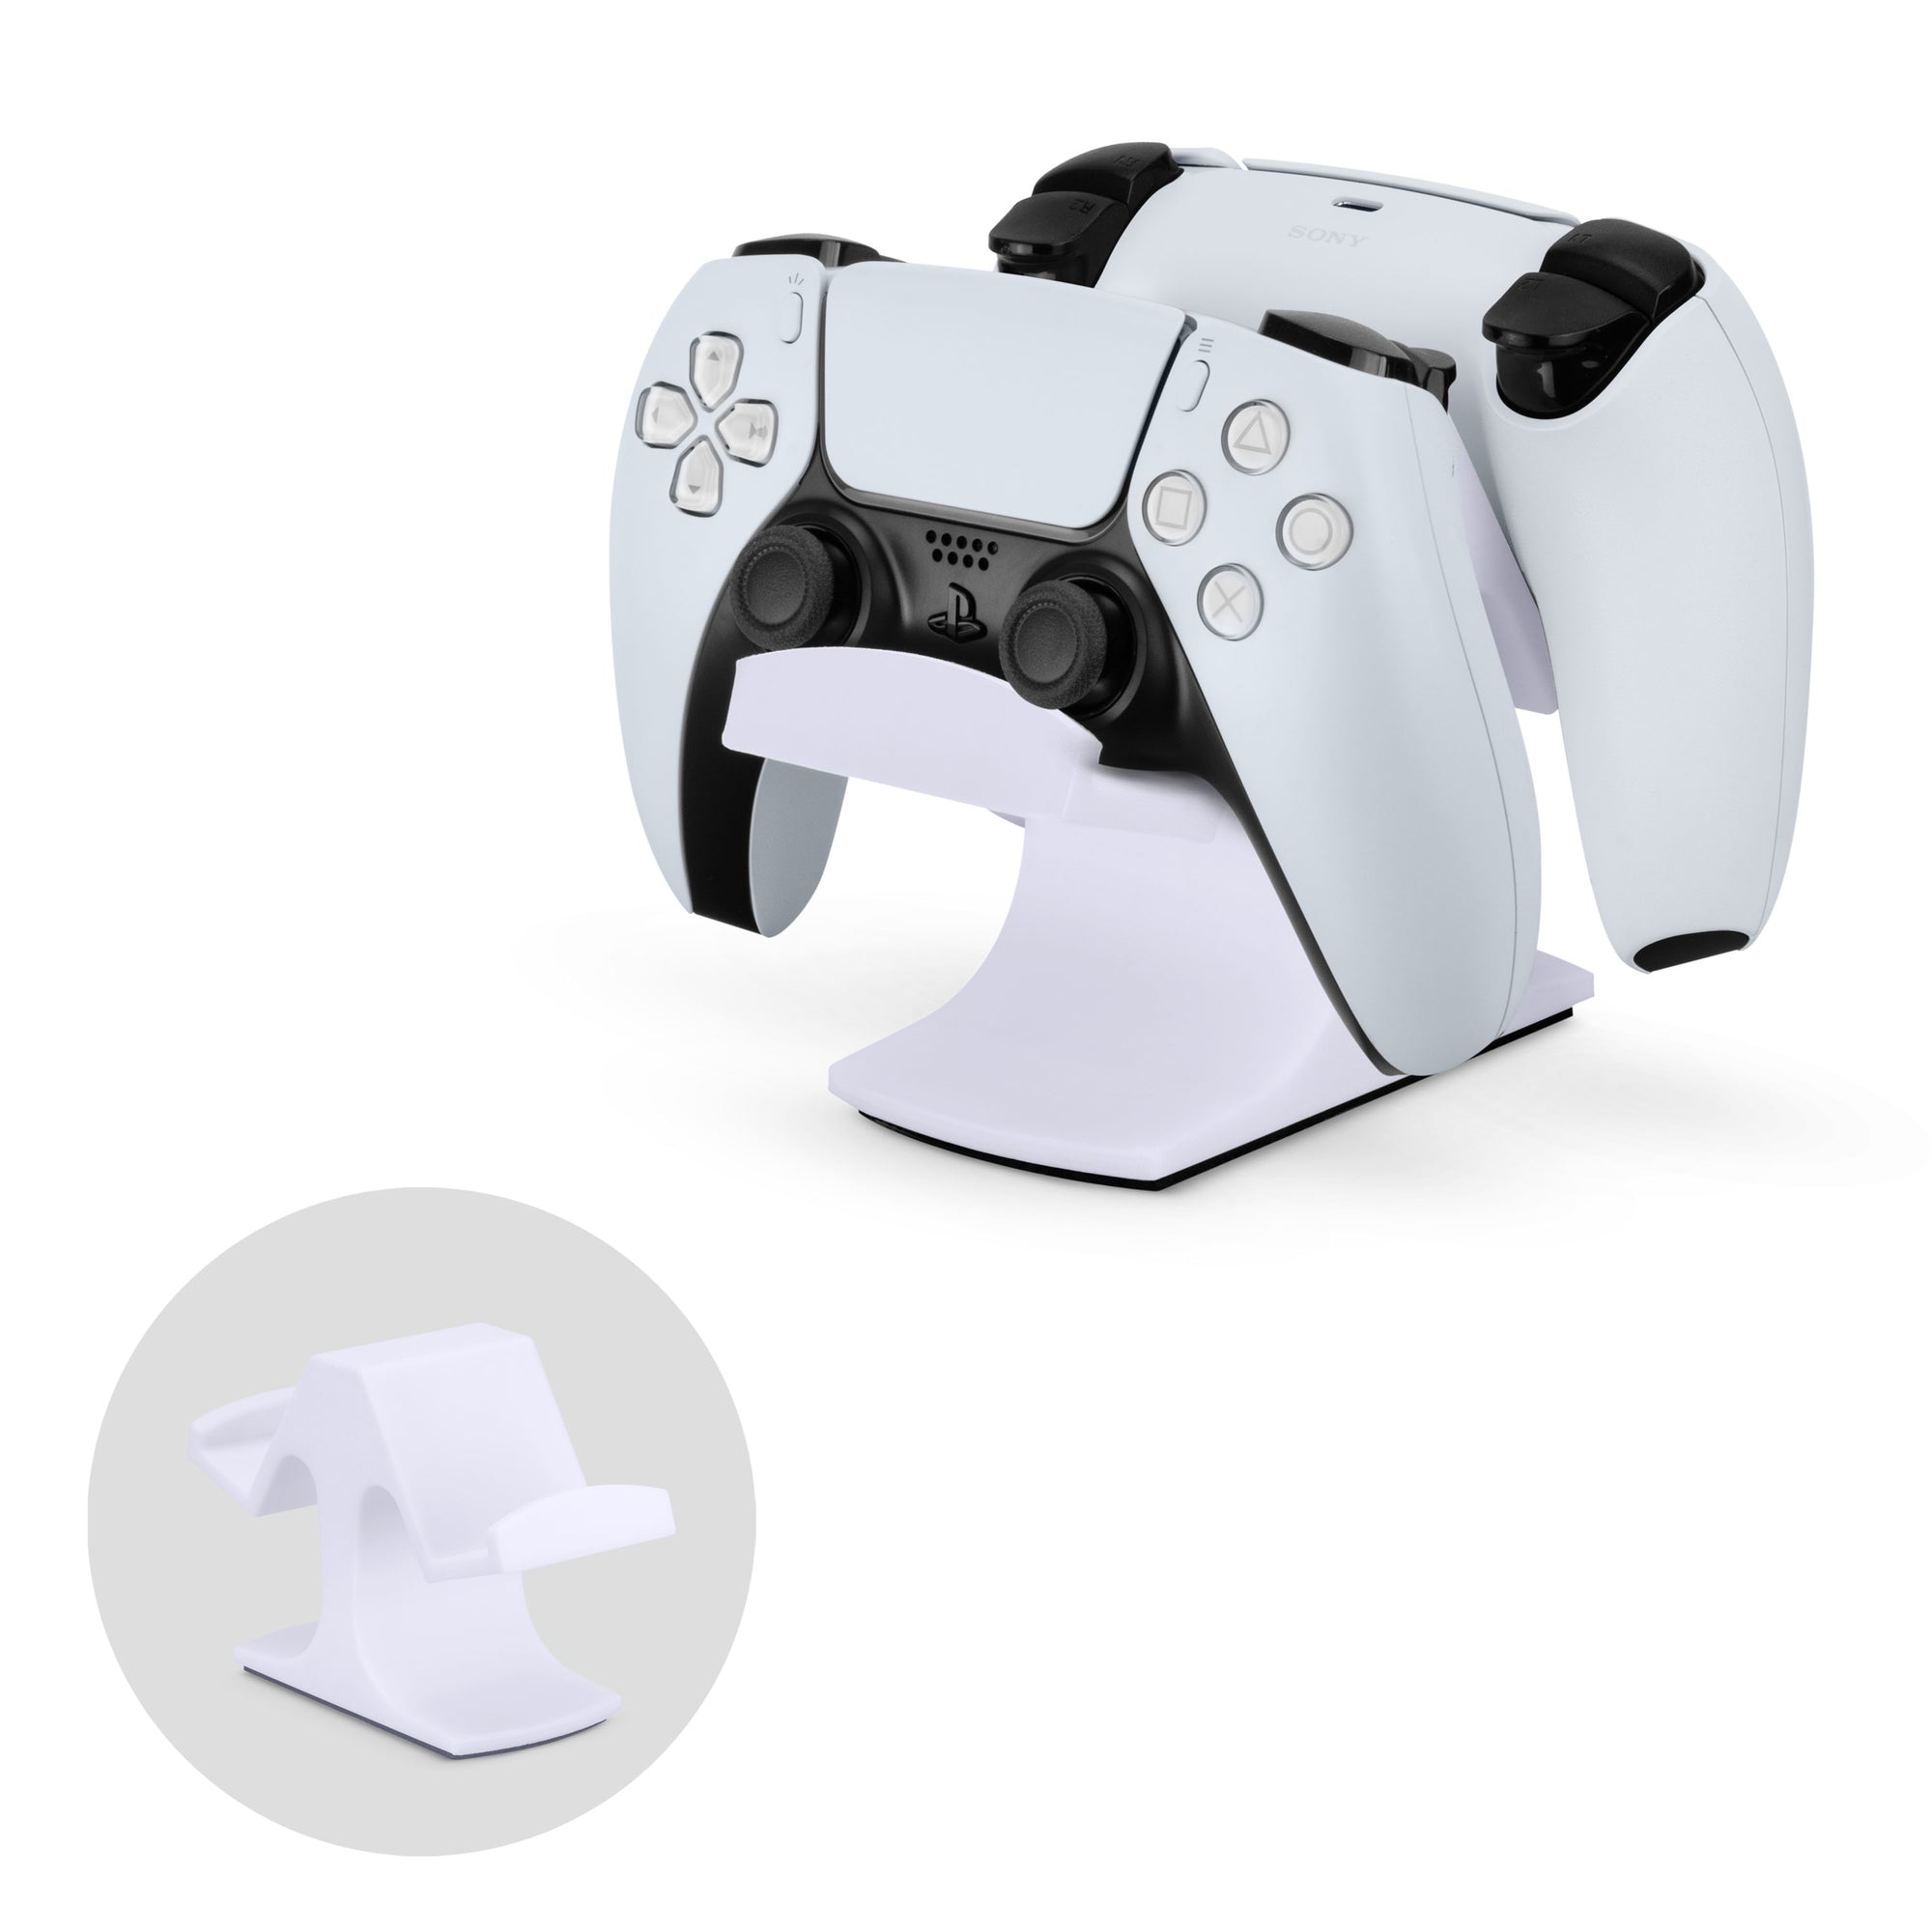 Dual Game Controller Desktop Holder Stand - Universal Design for Xbox ONE, PS5, PS4, PC, Steelseries, Steam & More